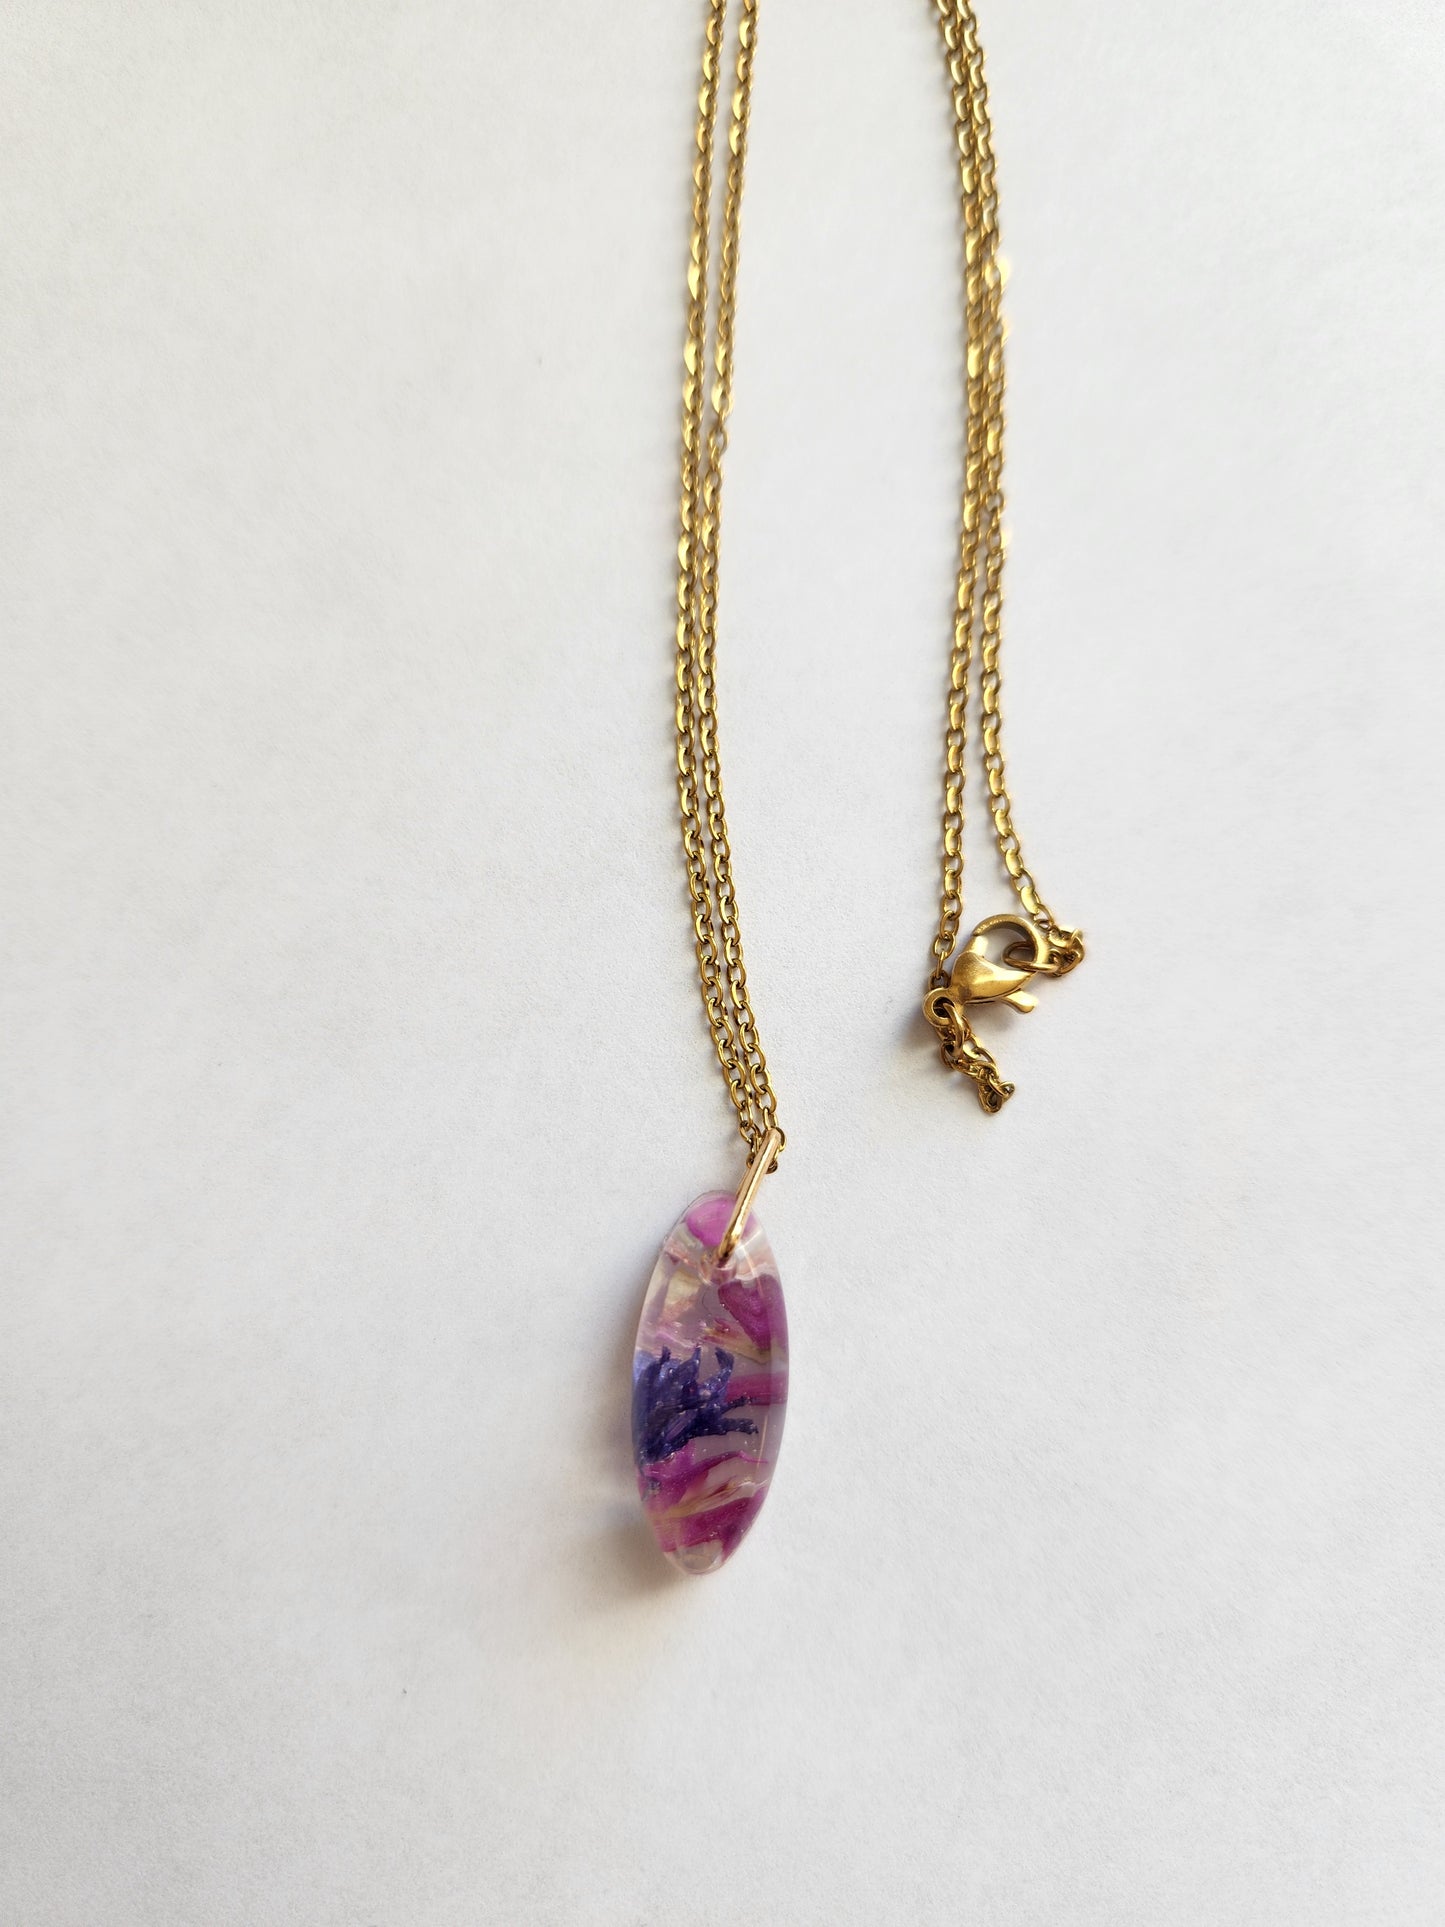 Pink + Pink 1" Oval Necklace